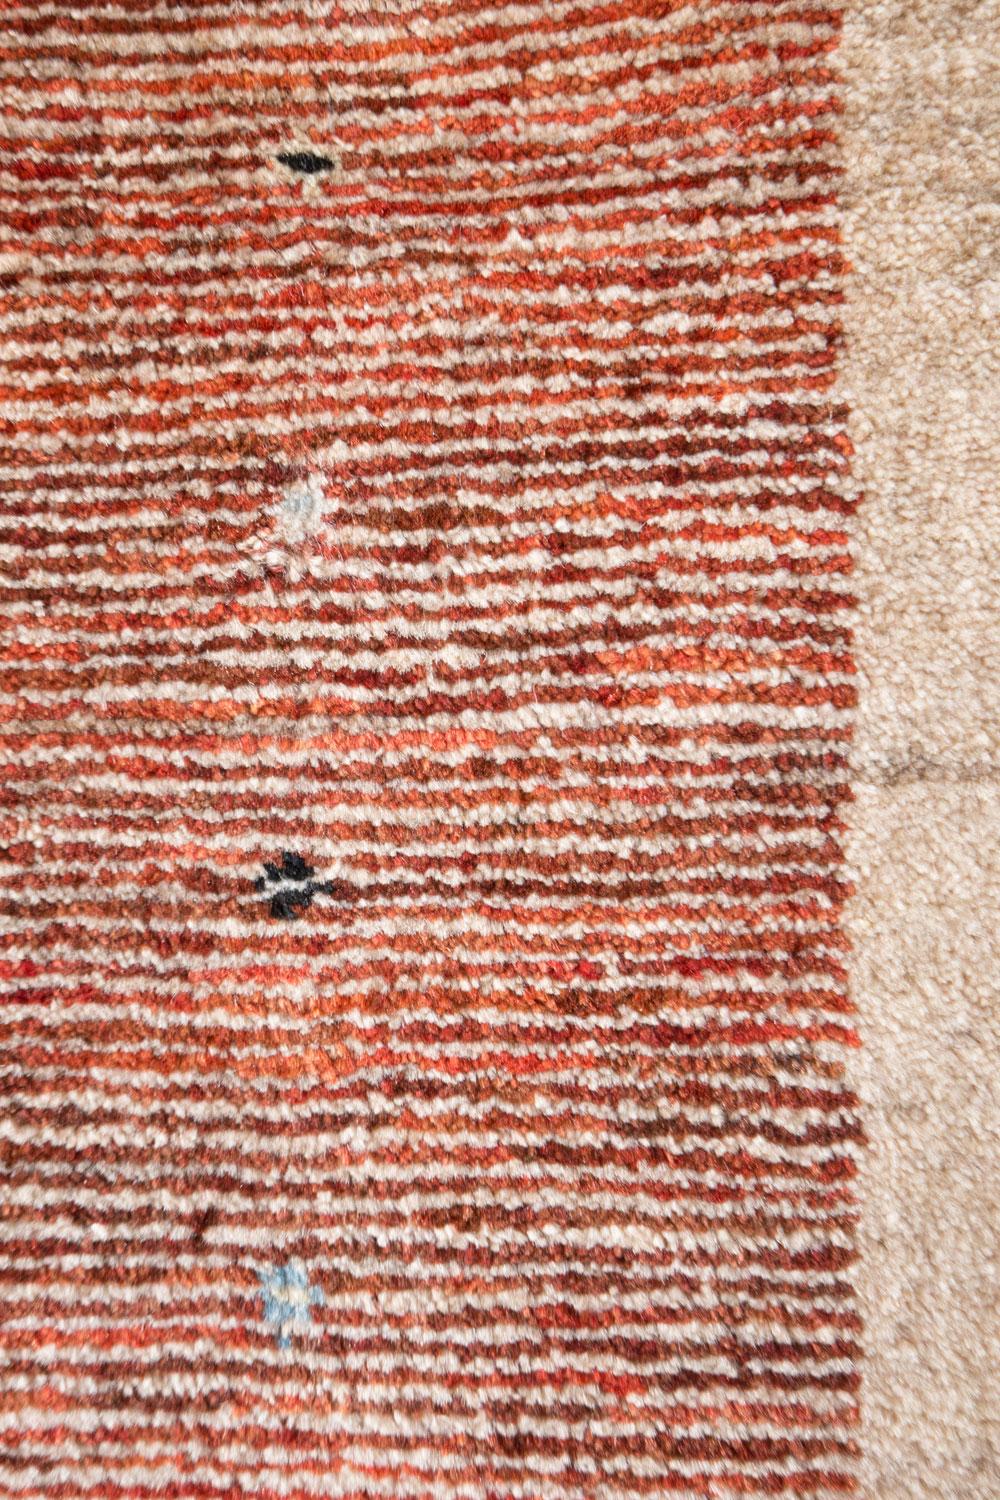 Mid-size soft red and neutral contemporary Gabbeh Persian wool rug. The barest of geometrics, this red form on the backdrop of undyed, light neutral sums up the Gabbeh in a short, straightforward manner. It's beautifully crafted of fine, hand-tied